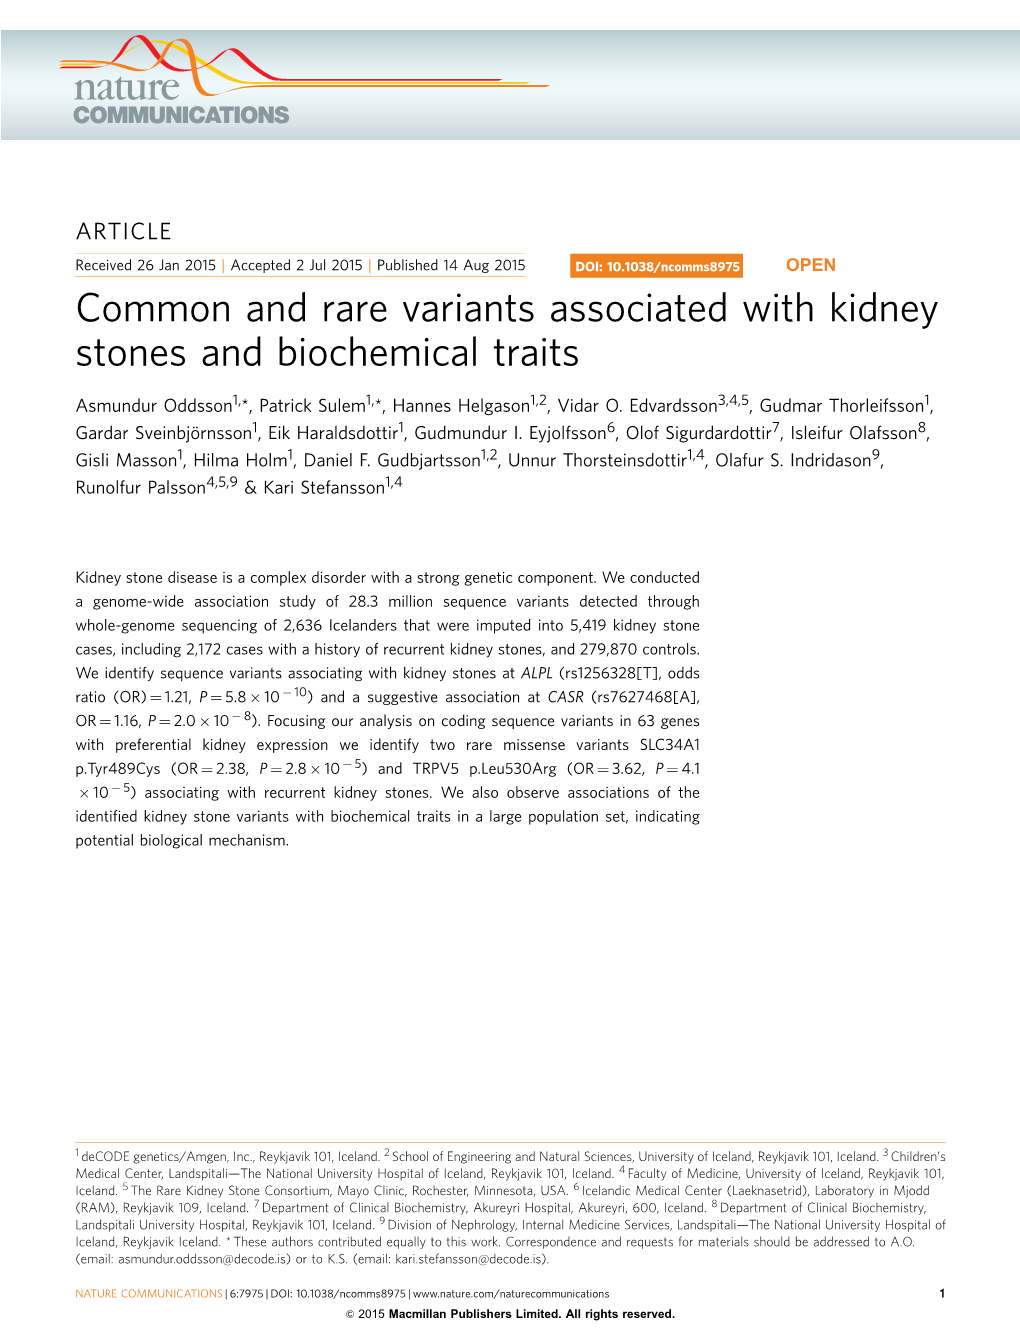 Common and Rare Variants Associated with Kidney Stones and Biochemical Traits